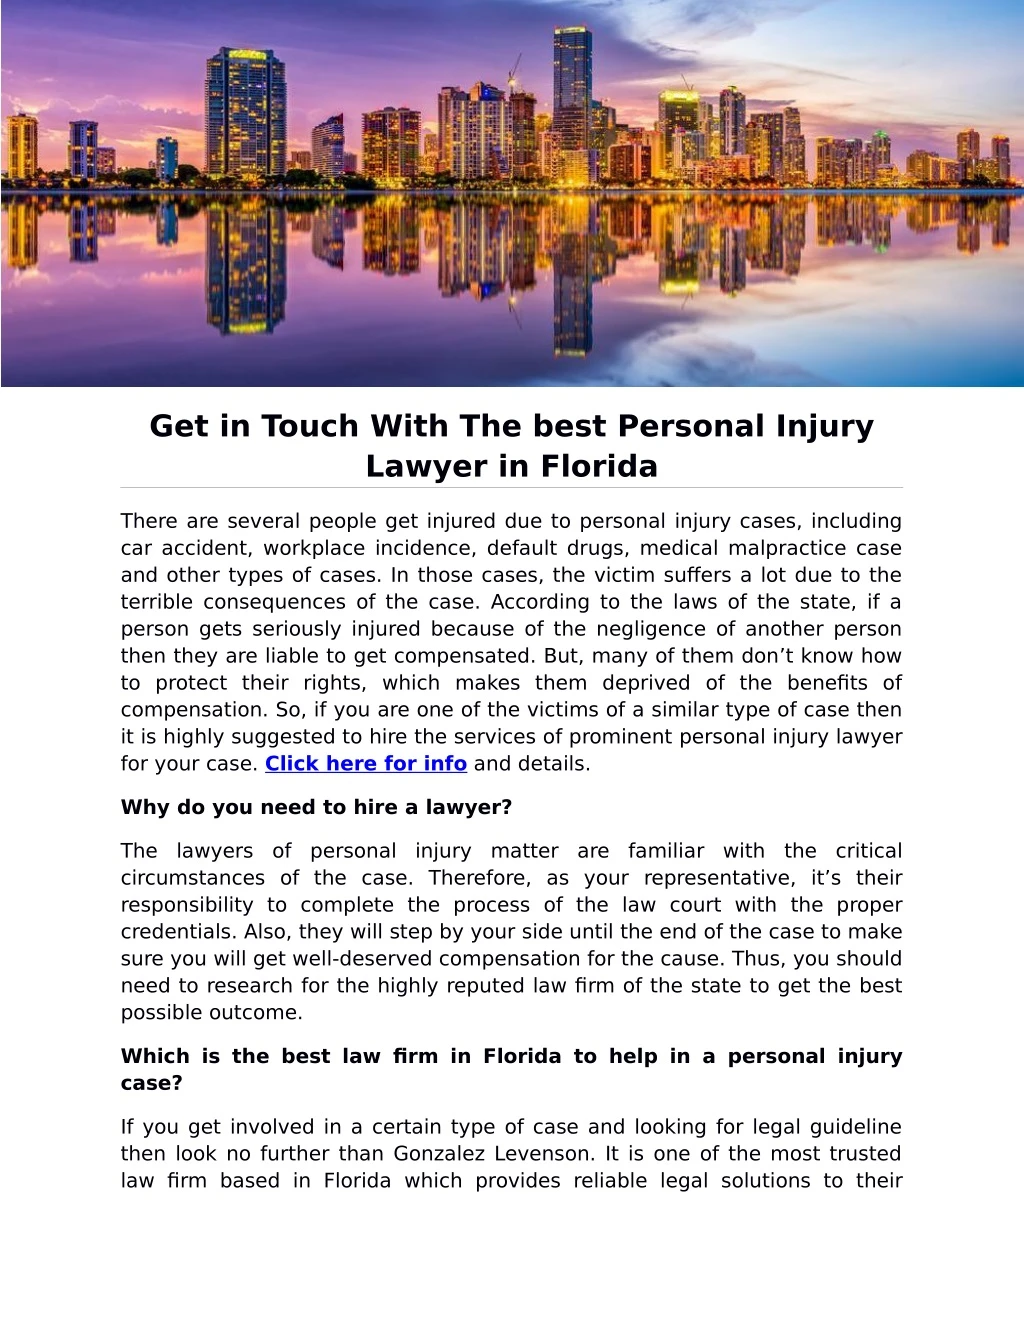 get in touch with the best personal injury lawyer